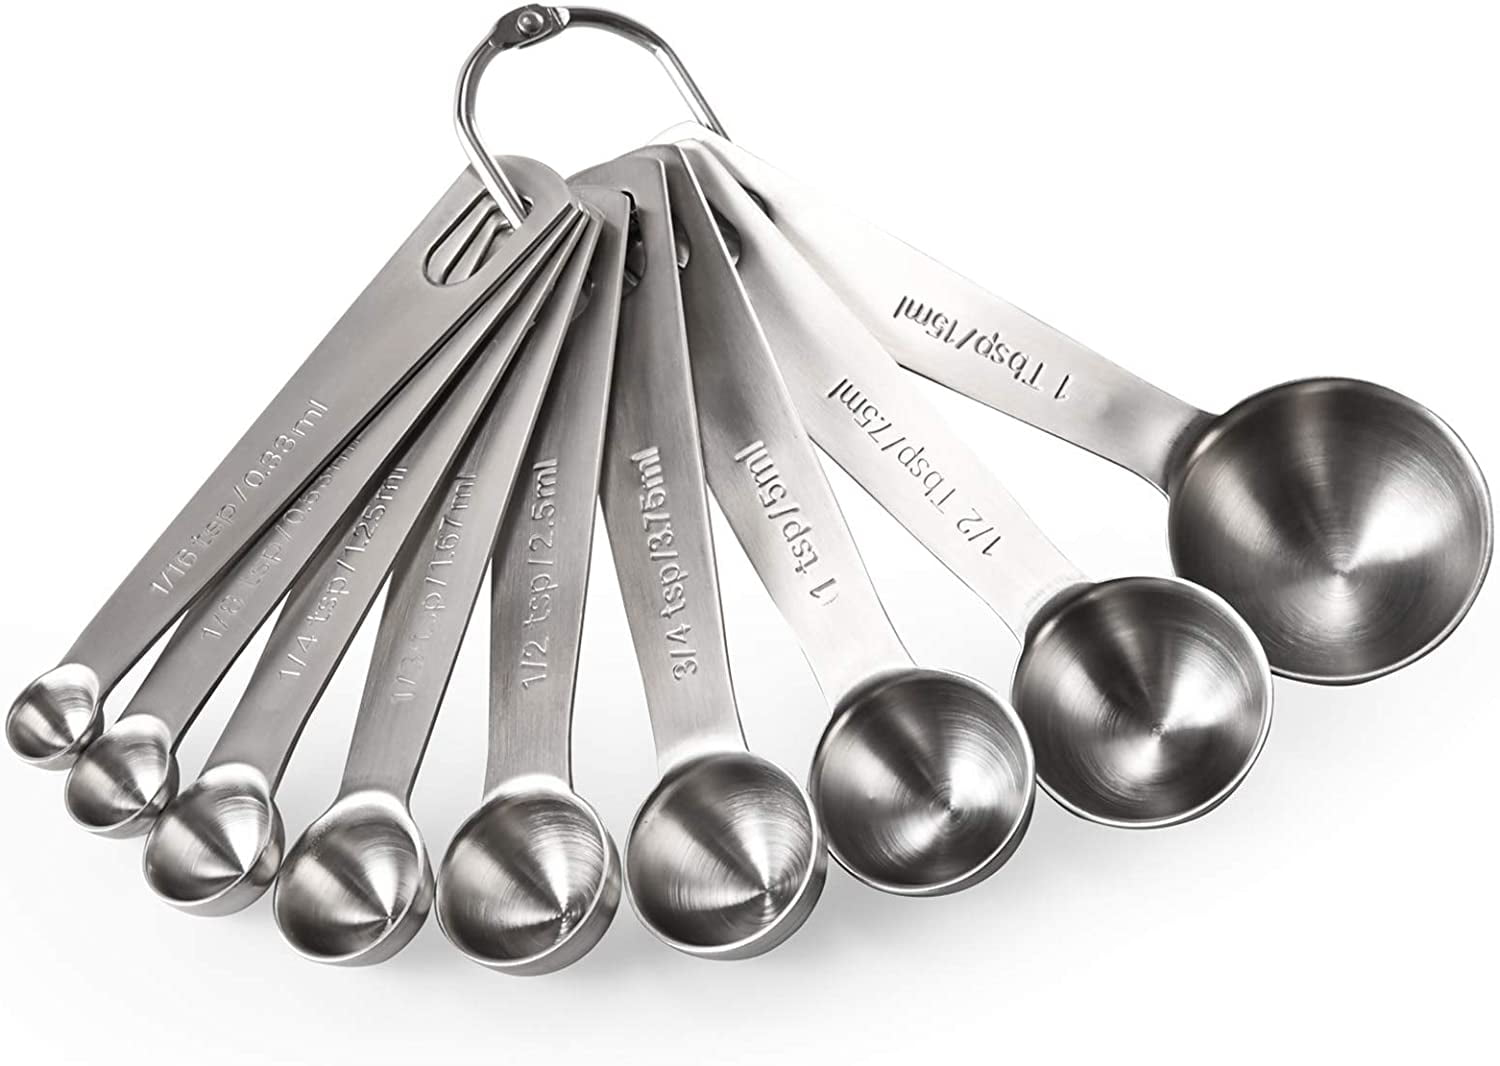  5PCS Small Measuring Spoons Set - Cuttte Stainless Steel Tiny  Measuring Spoons for Cooking Baking, 1/4 tsp, 1/8 tsp, 1/16 tsp, 1/32 tsp,  1/64 tsp, Teaspoon Mini Measuring Spoons for Powders, Spices: Home & Kitchen